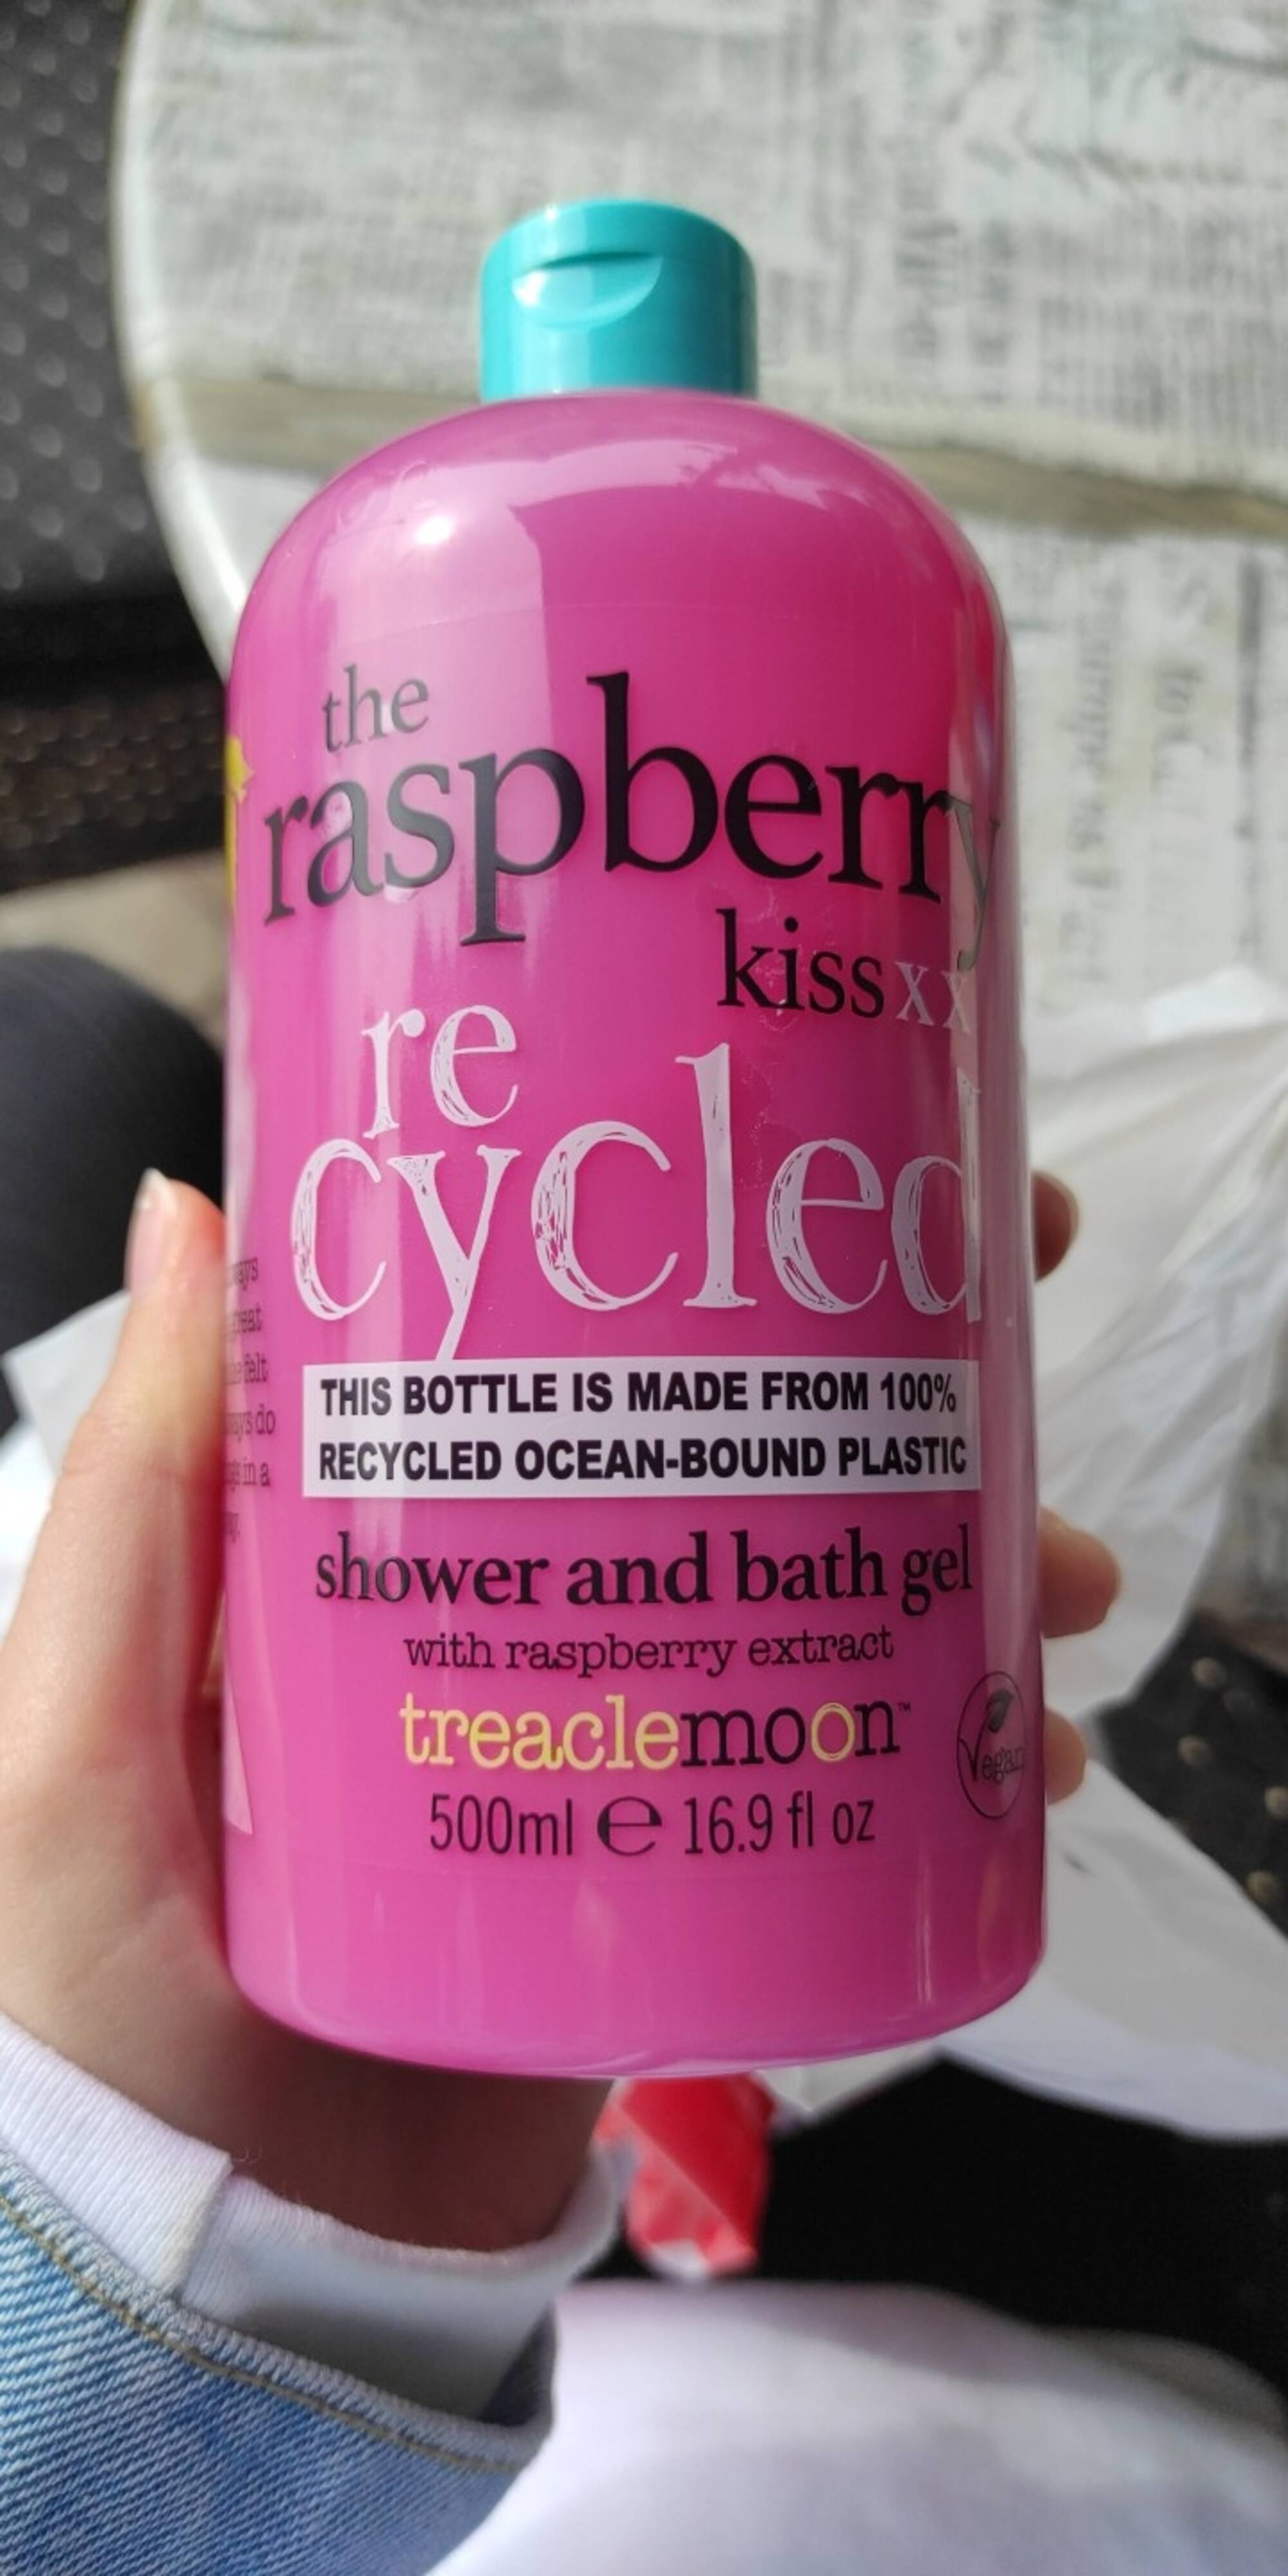 TREACLE MOON - The raspberry kiss recycled - Shower and bath gel